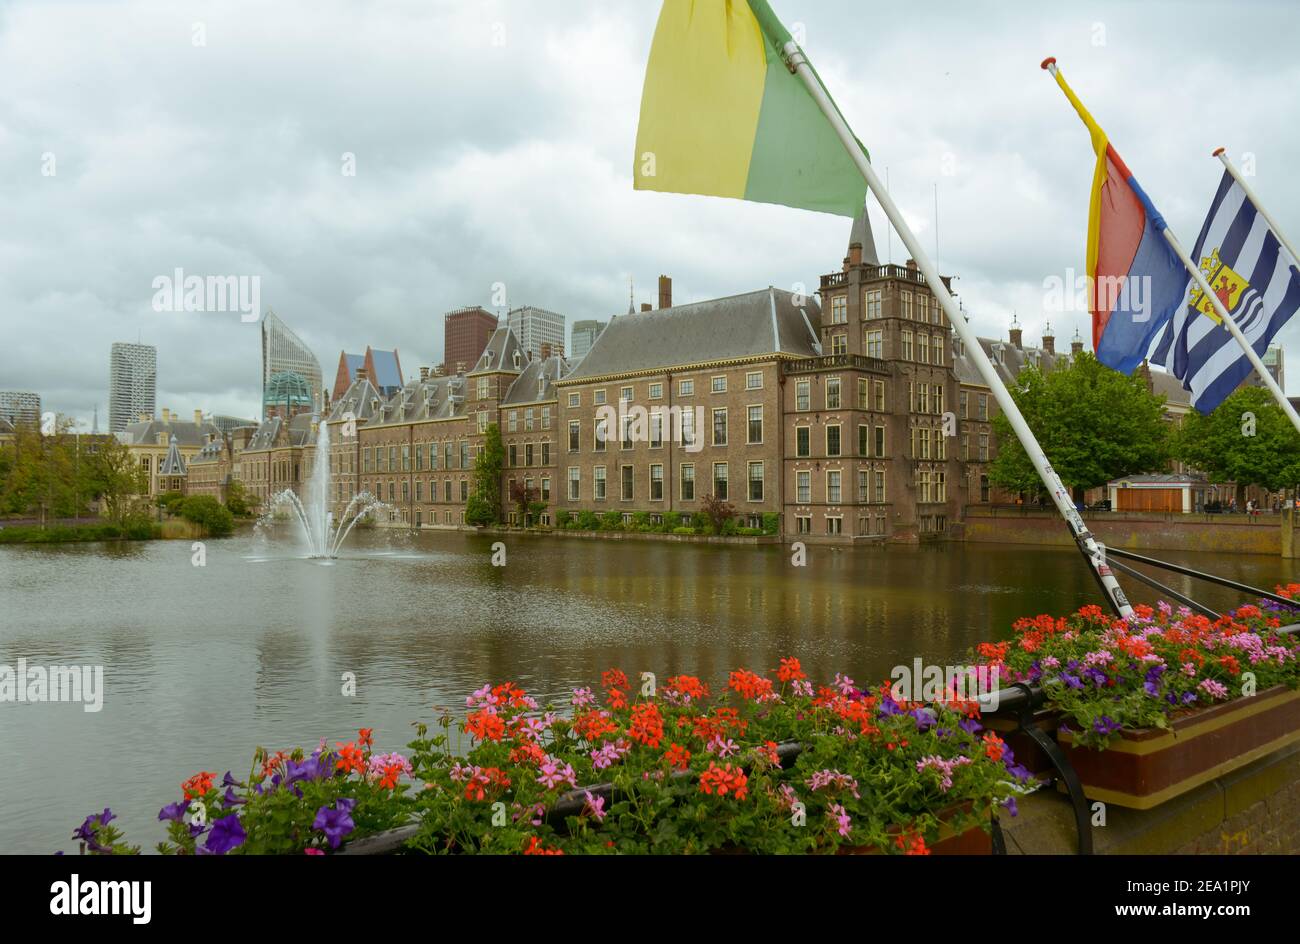 The Binnenhof castle on a cloudy day, next to the Hofvijver lake in the city center of The Hague (Den Haag). The Dutch parliament building is located Stock Photo